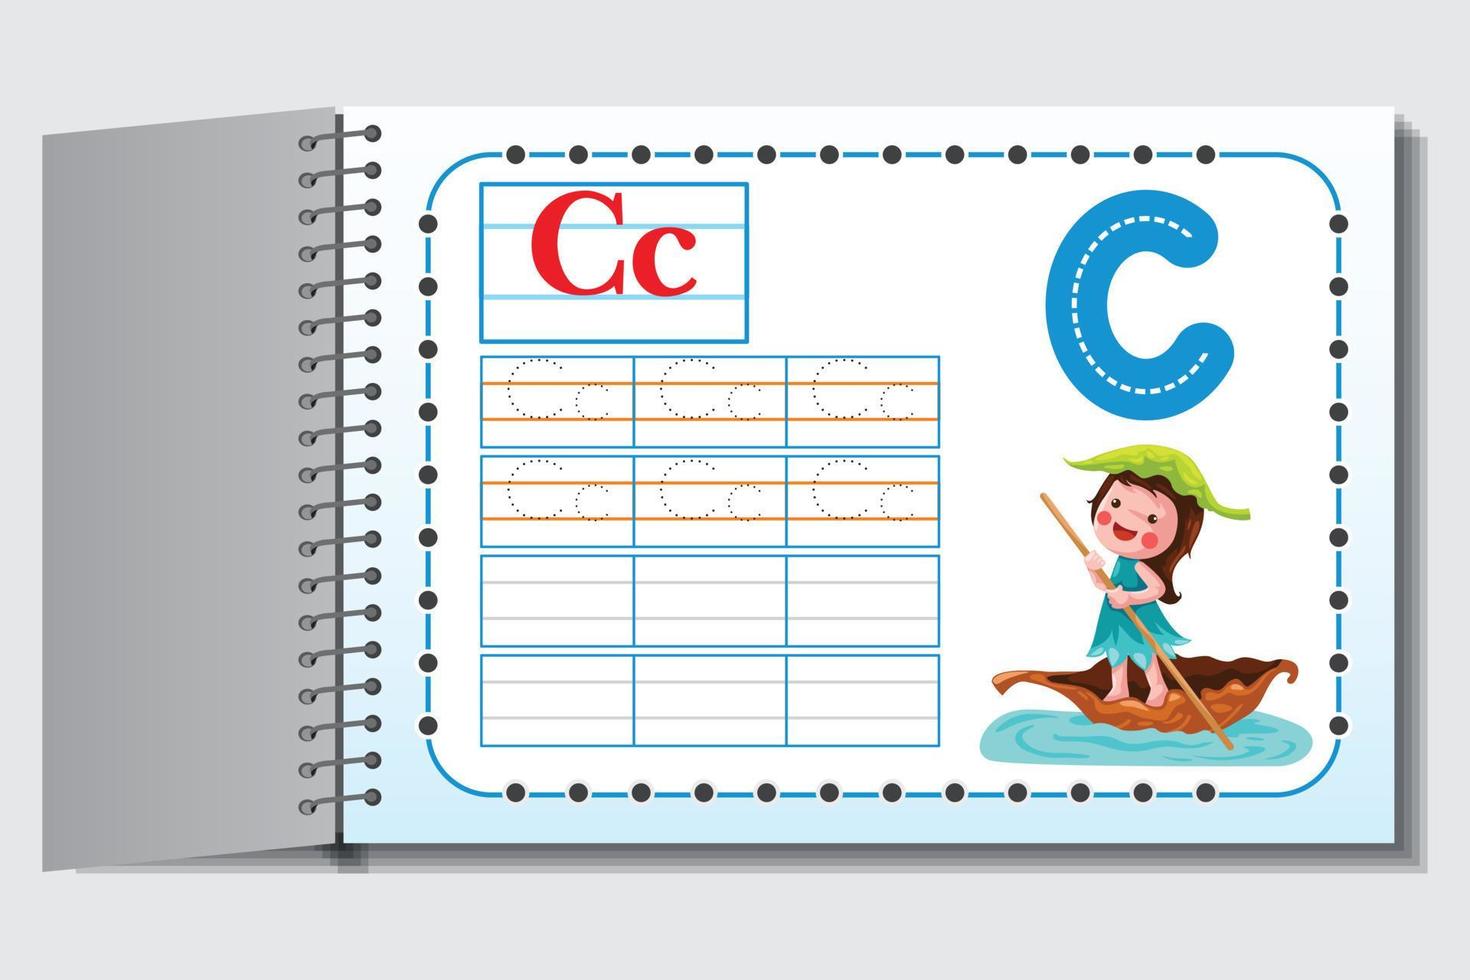 Abc Kids activity worksheets for students with cartoon and colorful background vector